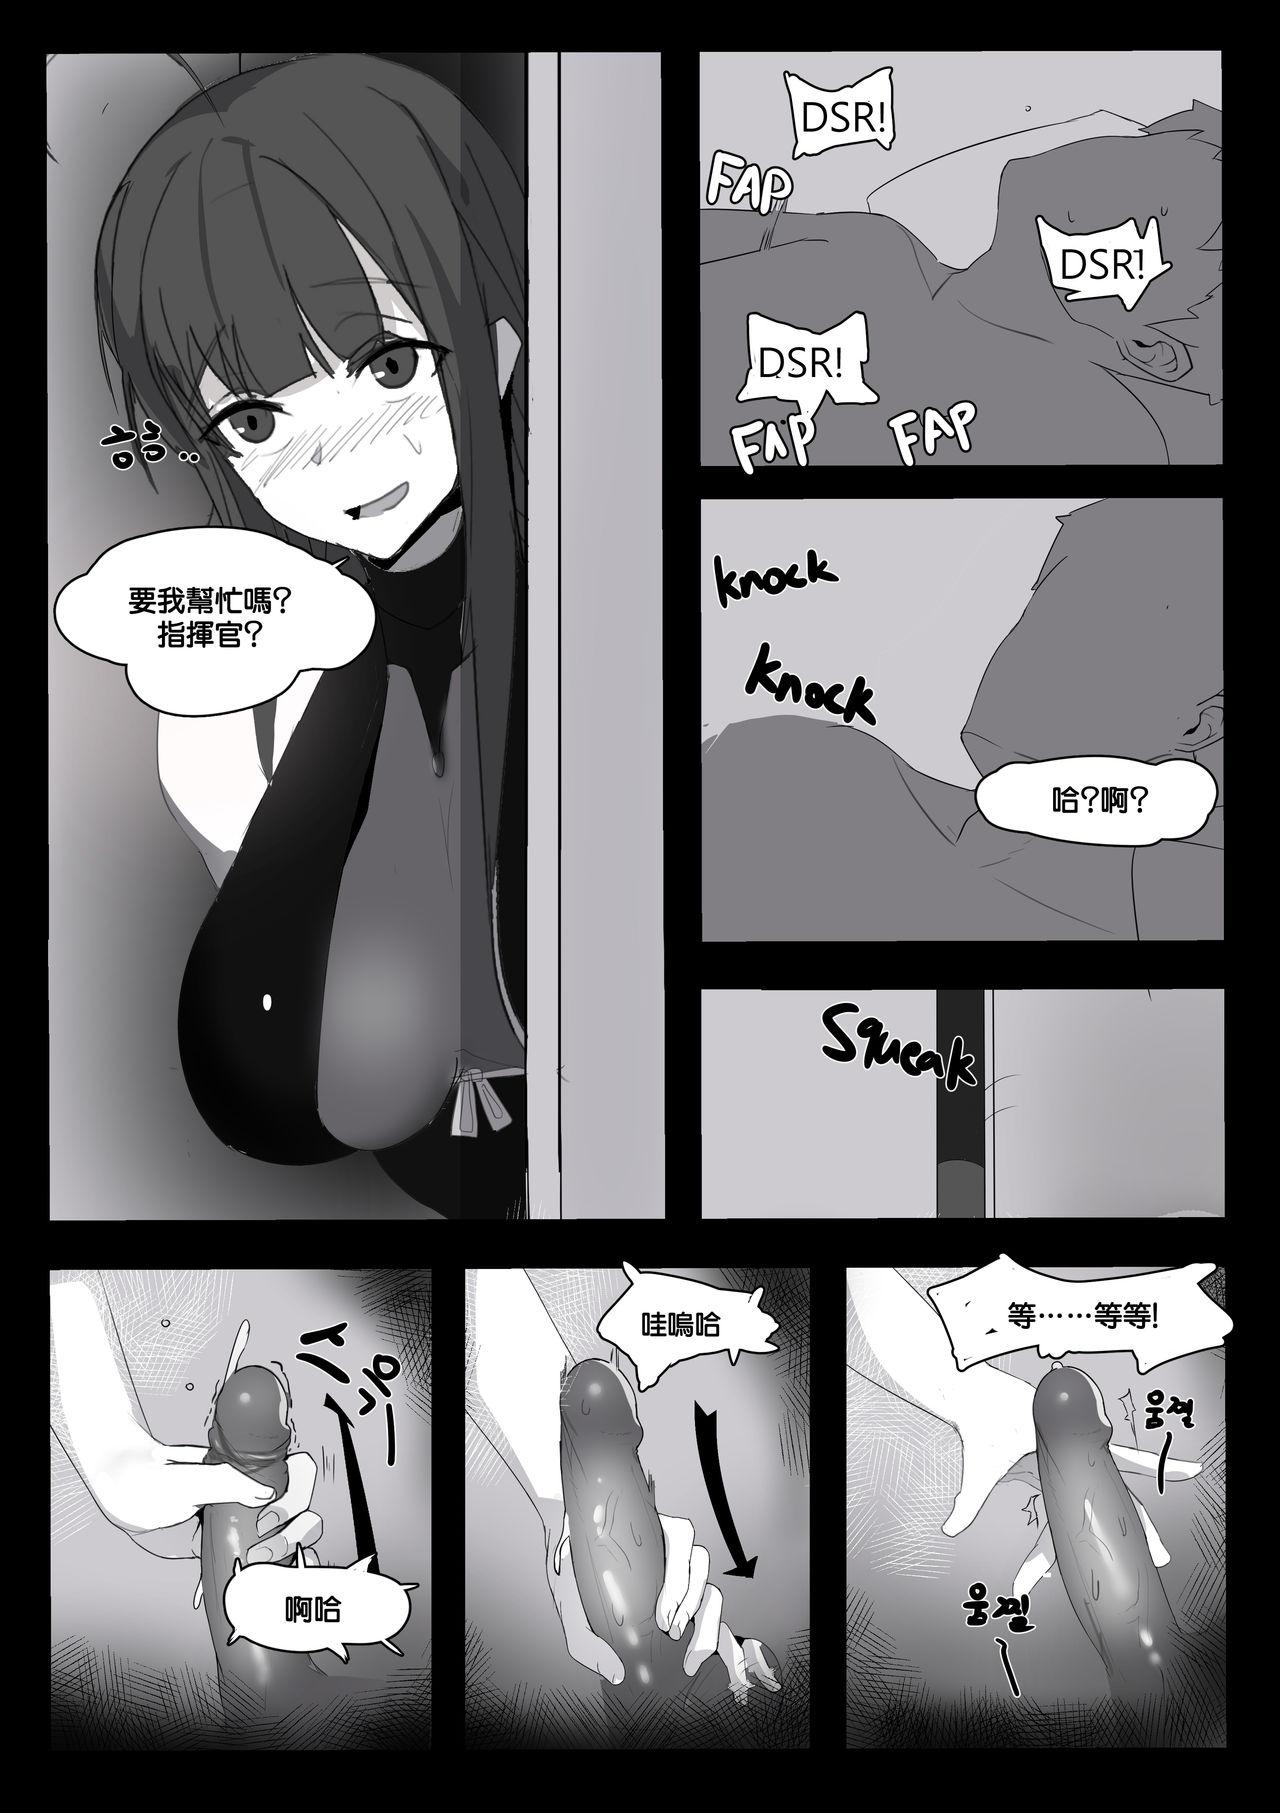 Hot Girls Fucking August 2018 - DSR Manga - Girls frontline Step Brother - Page 4